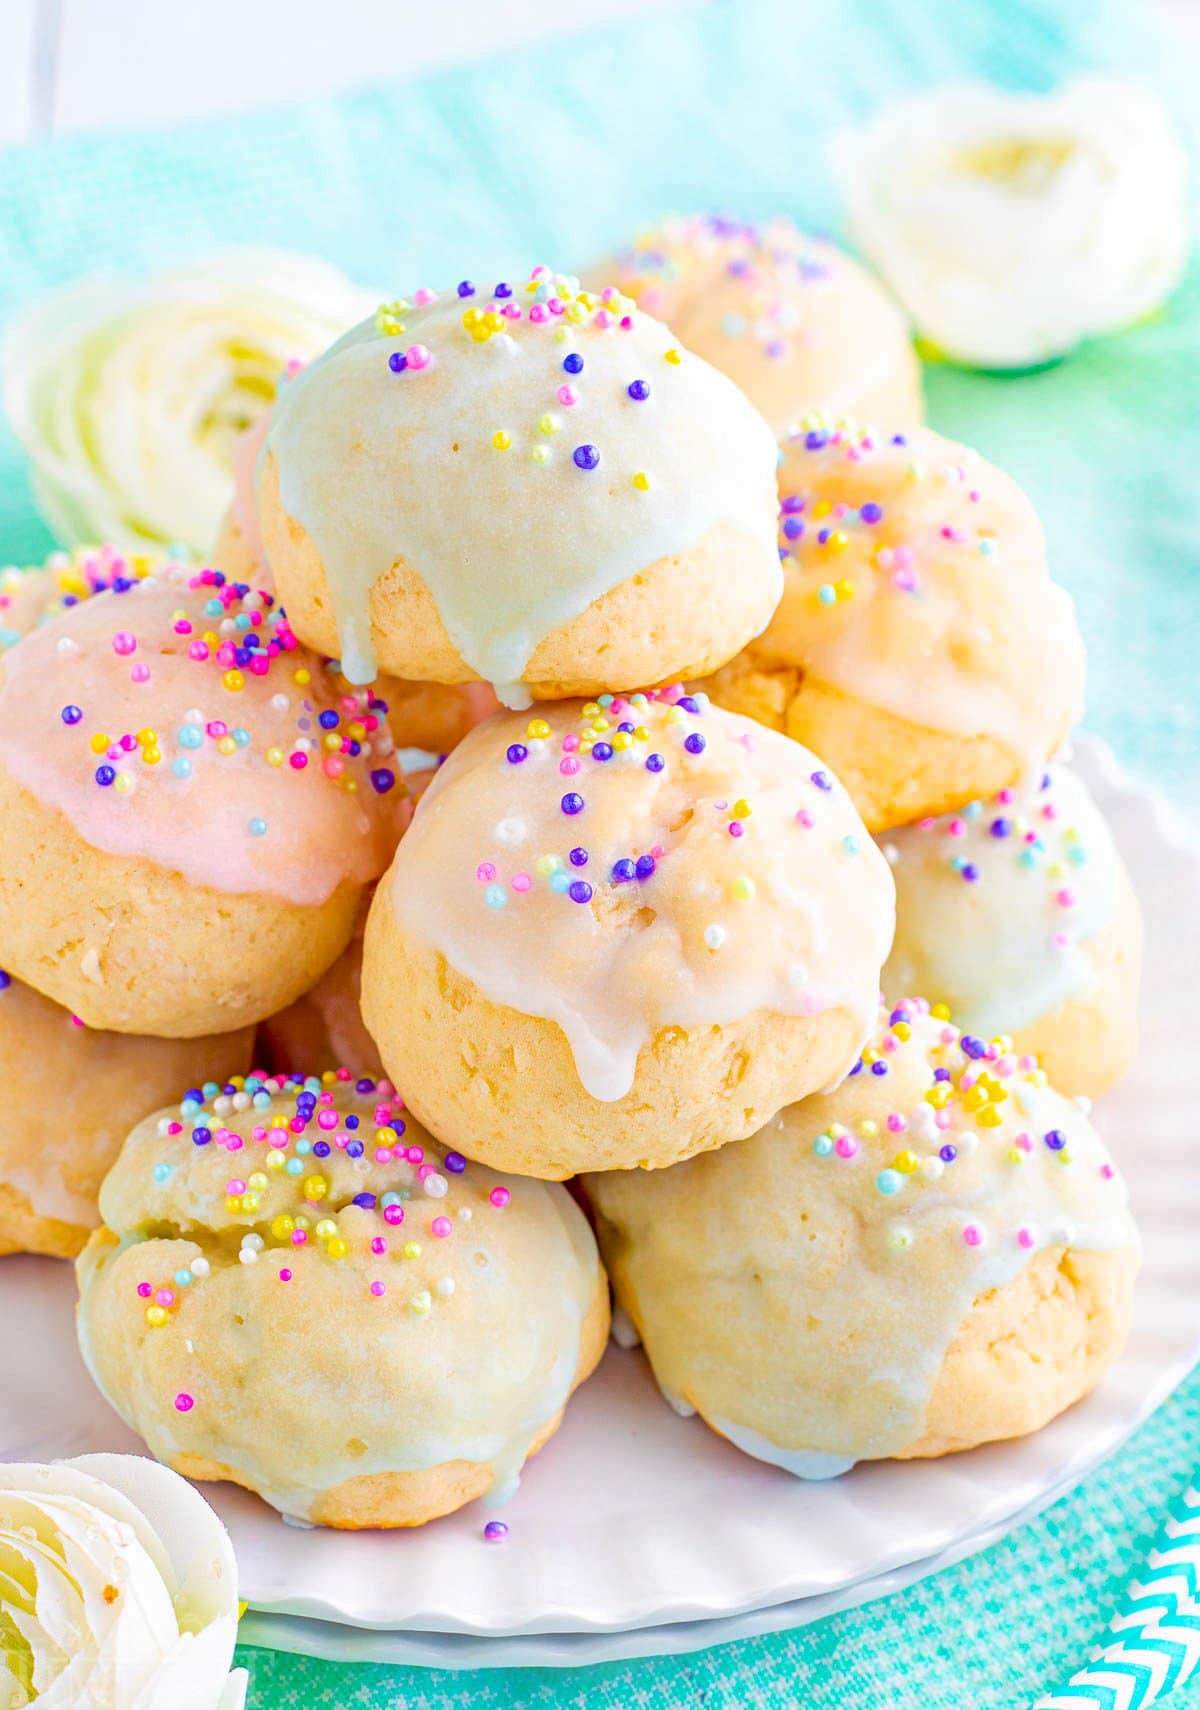 coloful italian cookies piled high on a white scalloped plate. cookies are topped with sprinkles and pastel glaze in varying colors.